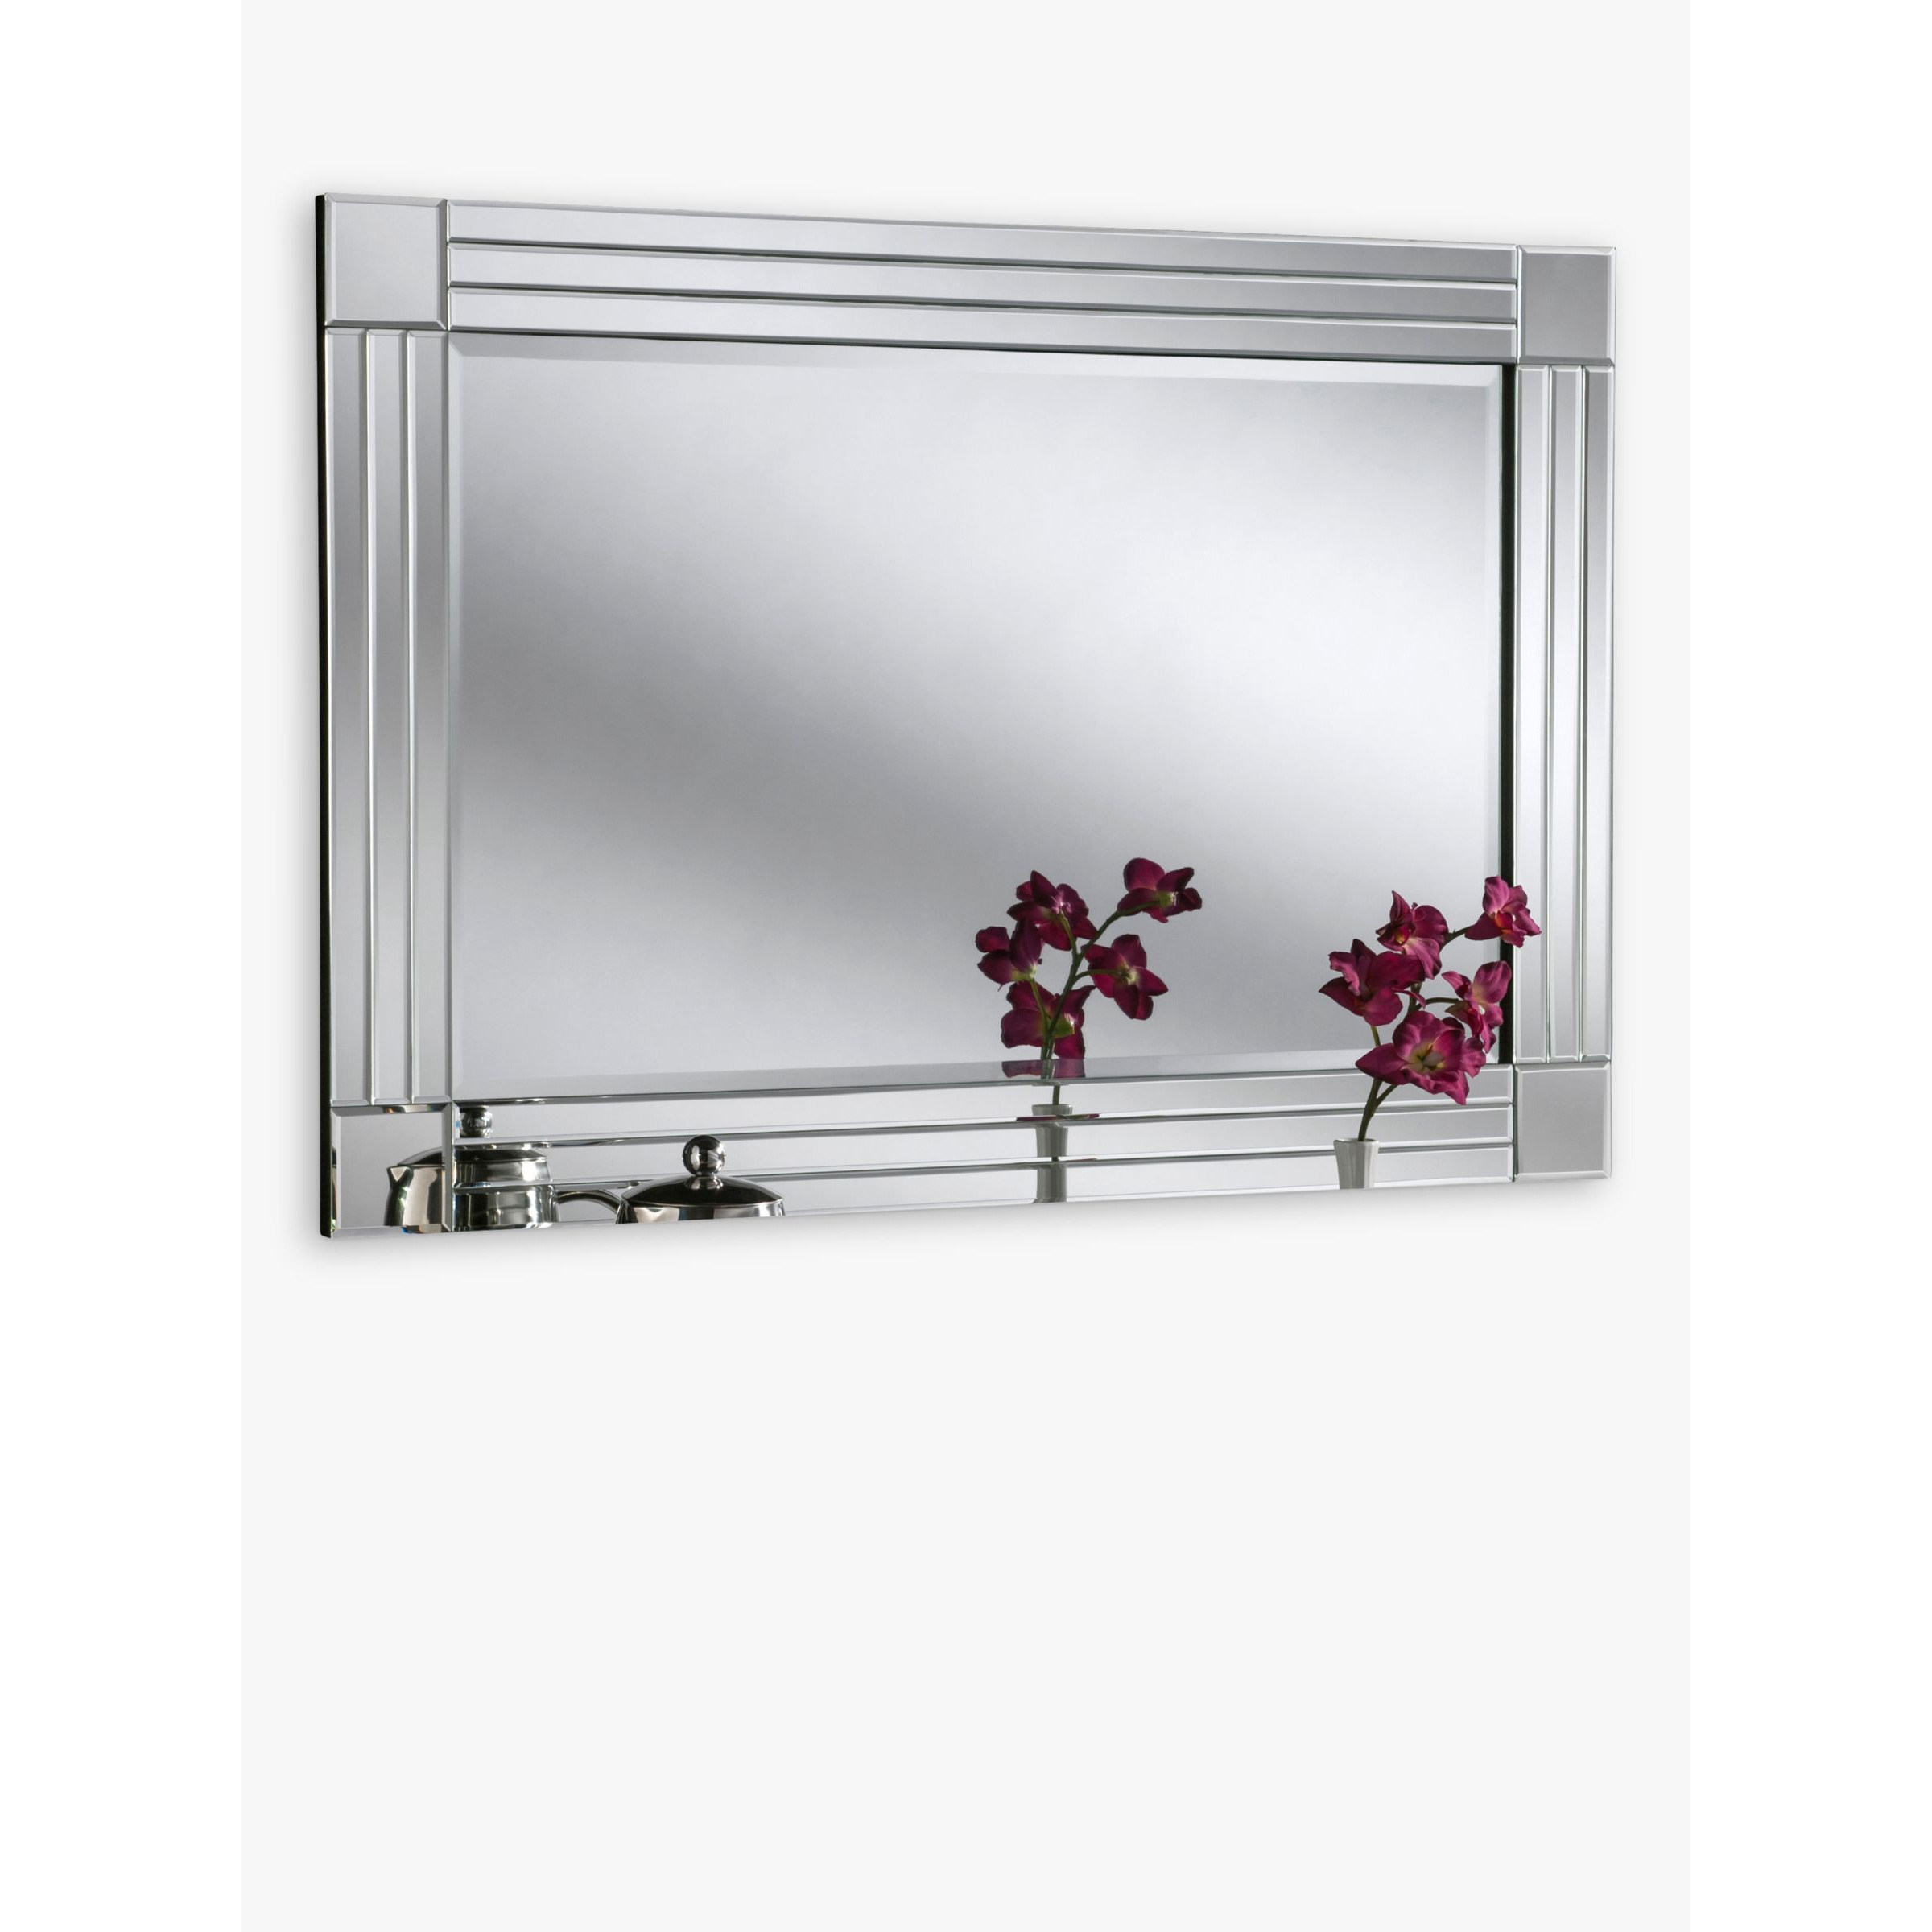 Yearn Bevelled Glass Square Corner Rows Rectangular Frame Wall Mirror, Clear/Black - image 1